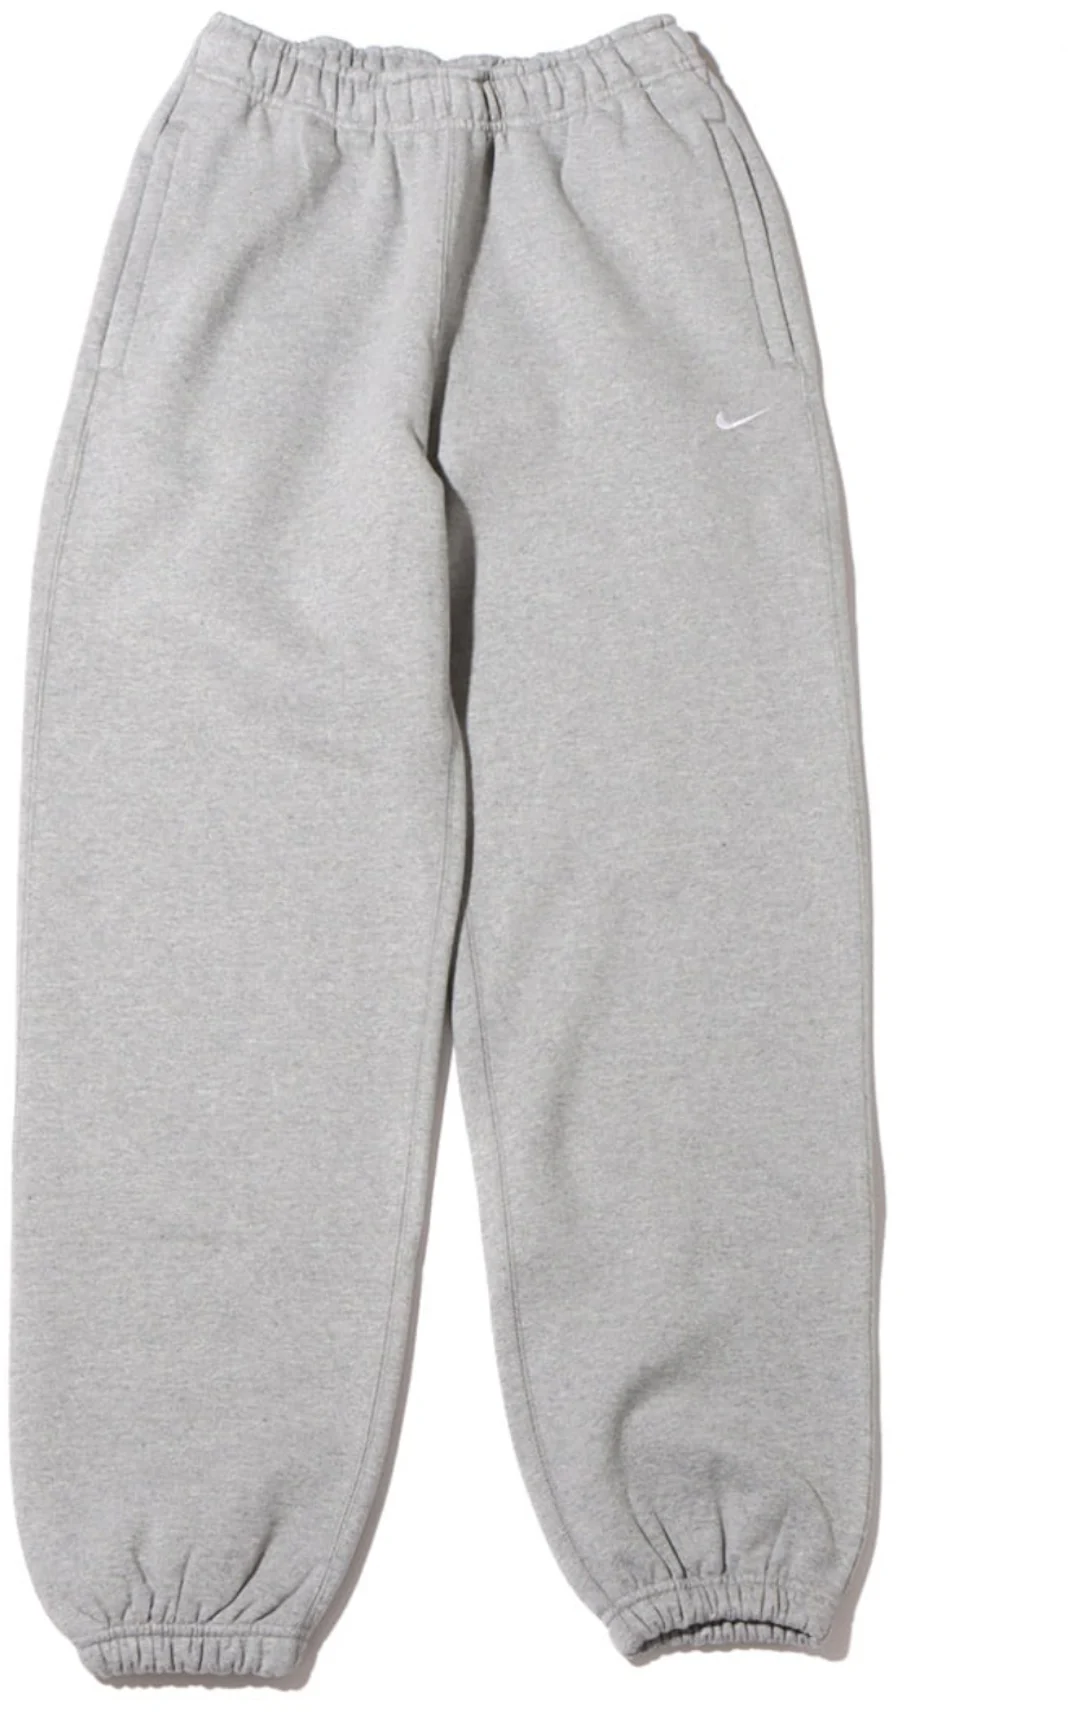 Nike Flare Sweatpants Gray Size L - $55 (21% Off Retail) - From